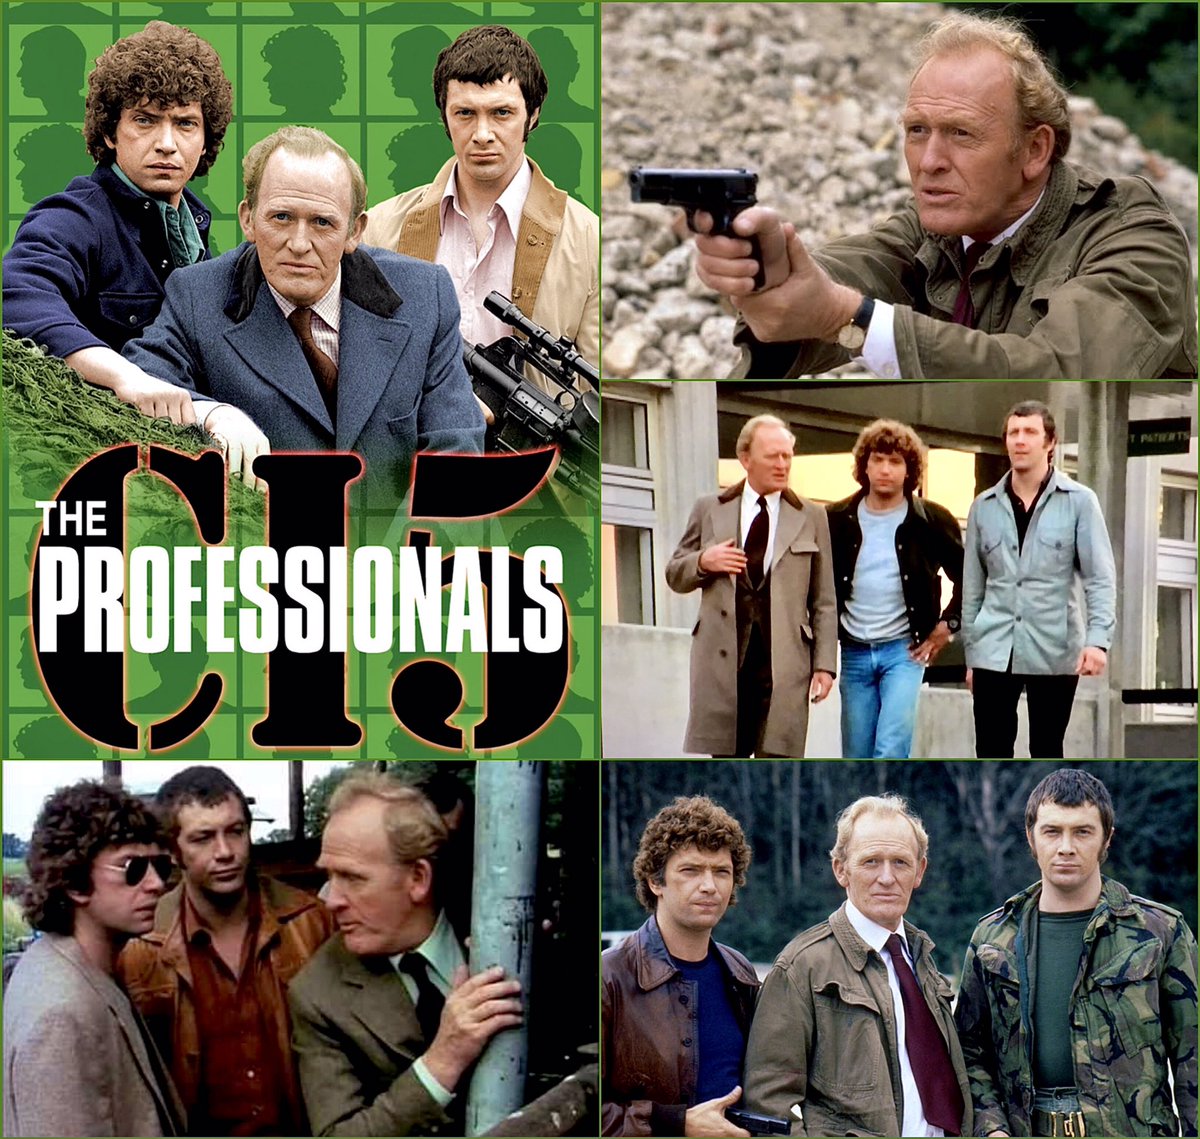 “THE PROFESSIONALS” (1977 - 1981)

Avengers Mark1 Productions  #LWT #BrianClemens @CI5BDC 

#GordonJackson #BOTD
Martin Shaw 
Lewis Collins